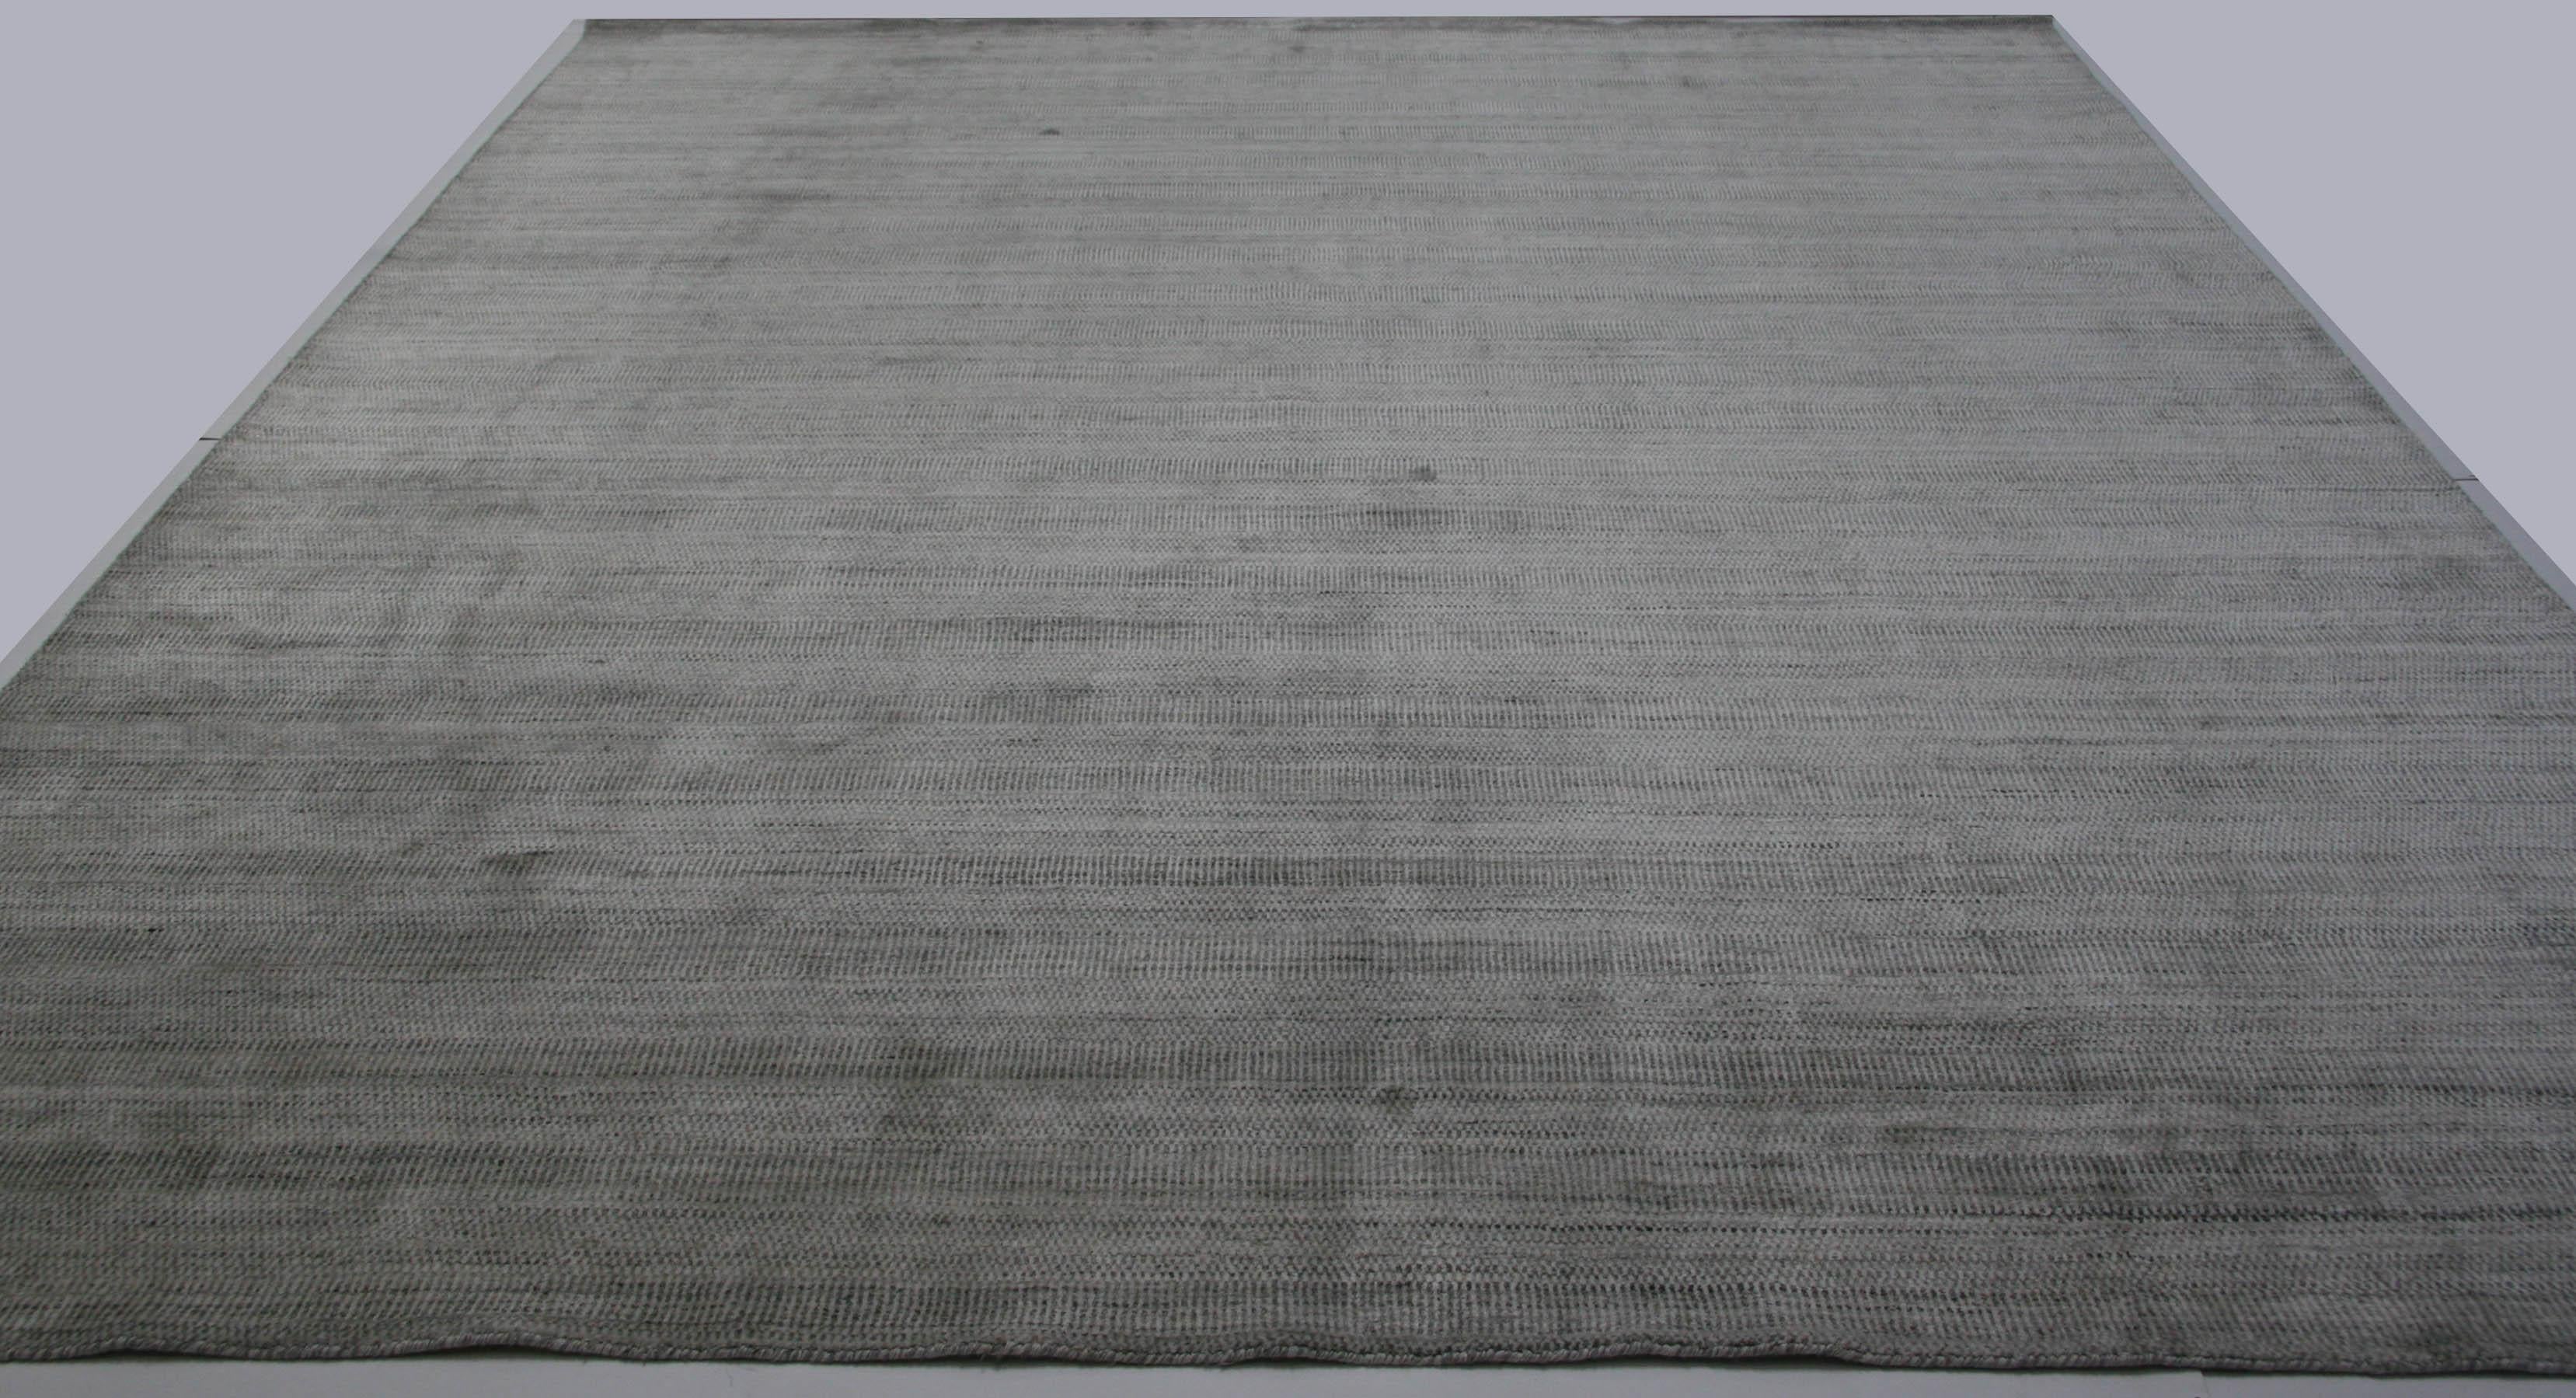 Zen Collection Pebble Rug In New Condition For Sale In Los Angeles, CA